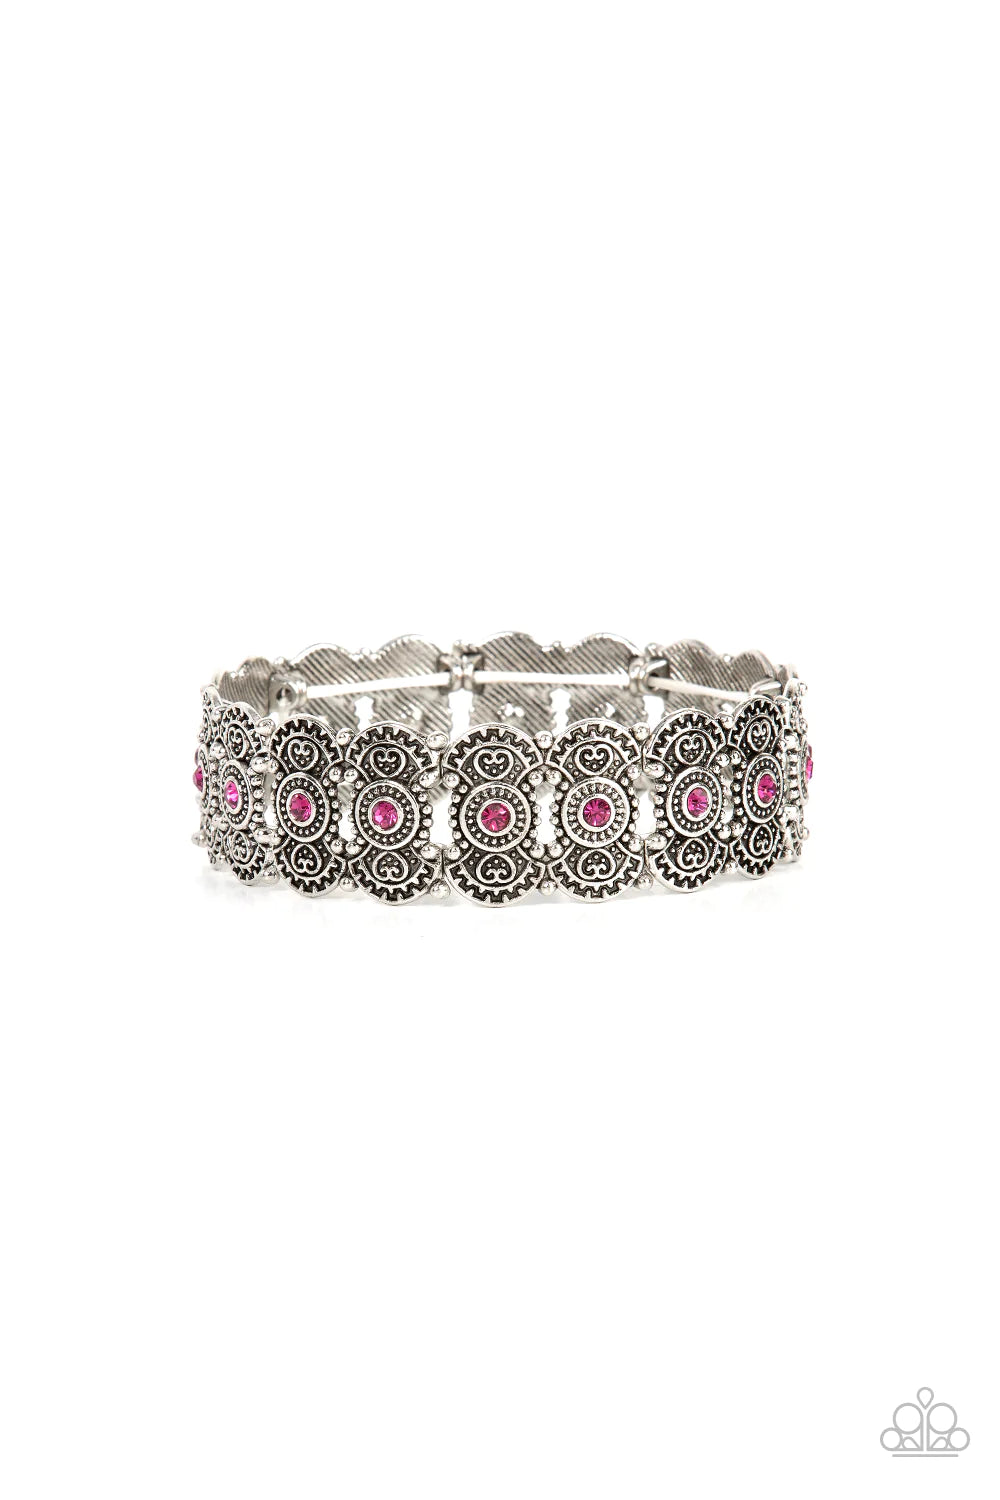 Paparazzi Accessories Rapturous Romance - Pink Dotted with sparkly pink rhinestones, pairs of studded and heart embossed patterned silver frames are threaded along stretchy bands around the wrist for a romantic fashion. Sold as one individual bracelet.